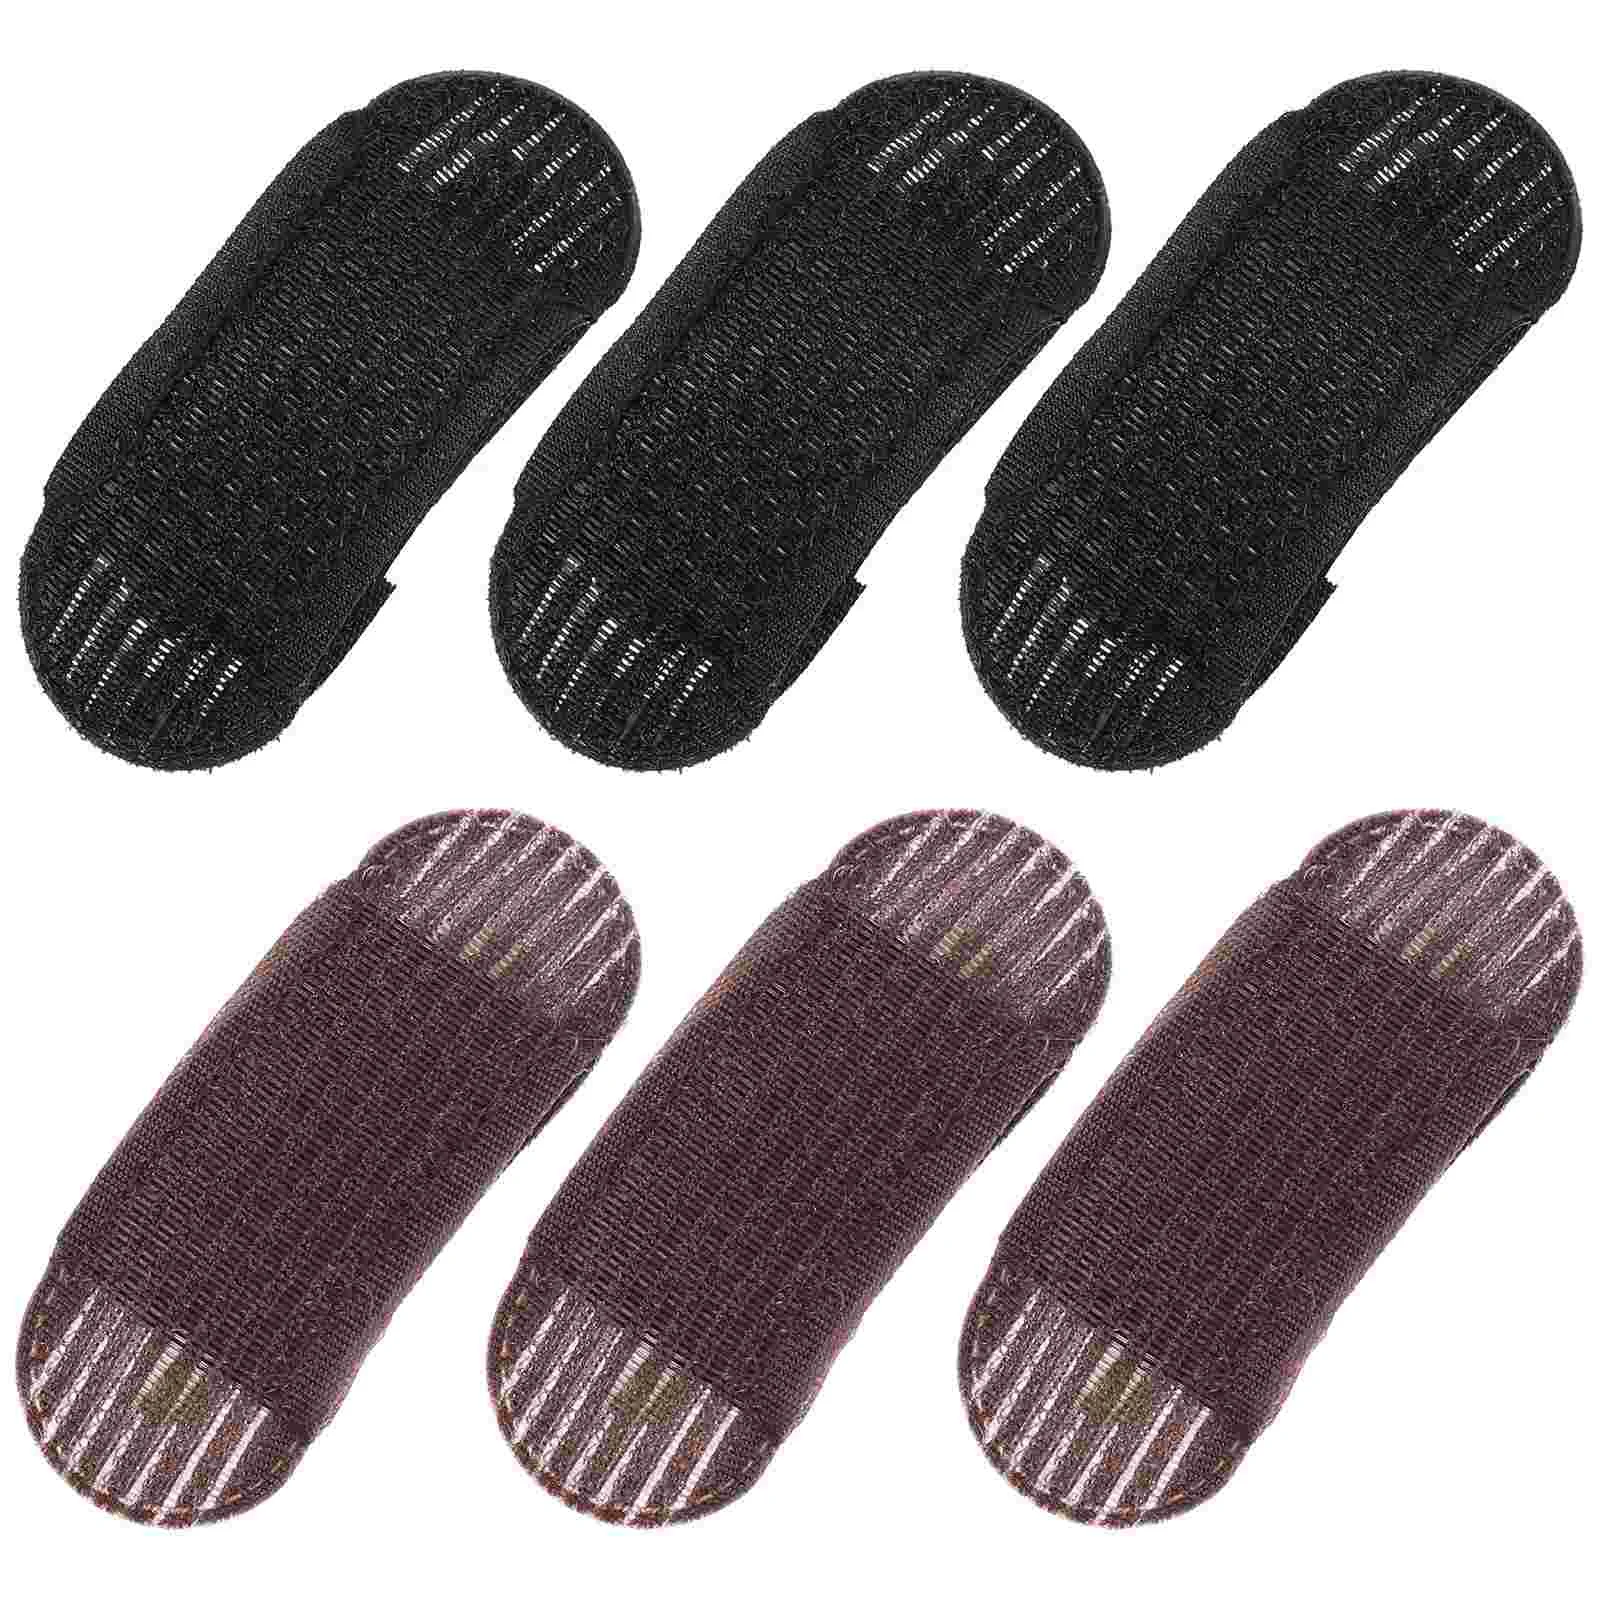 

6 Pcs Hair Pad Nail Care Products Snap Hairpin Grip Bump Up Holder Clippers Head Insert Barrettes Nylon It Man